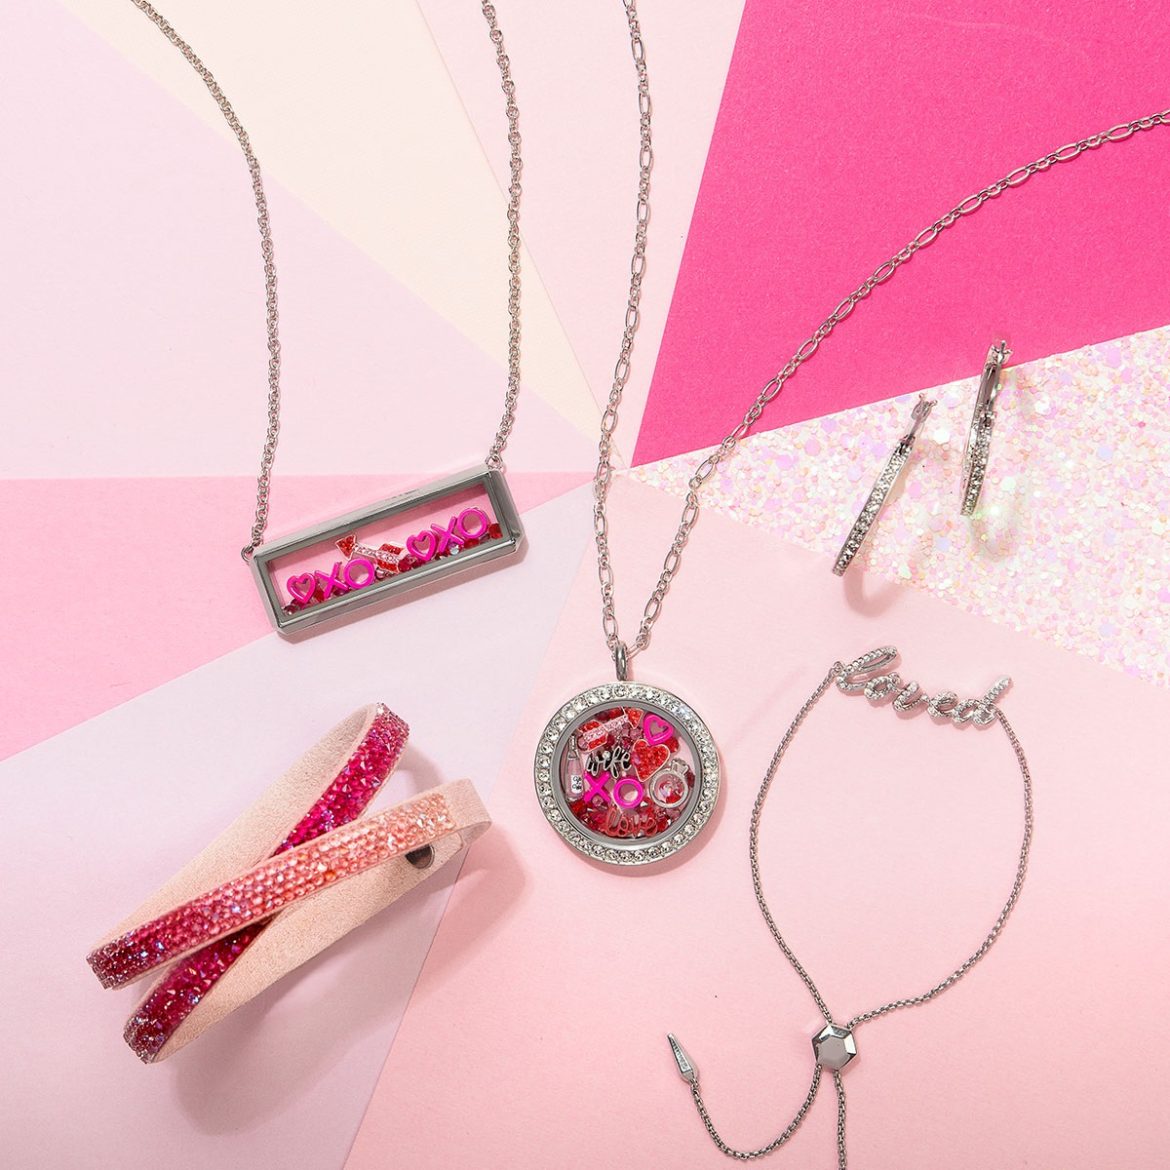 Origami Owl’s Limited Edition Valentine’s Day Collection 2019